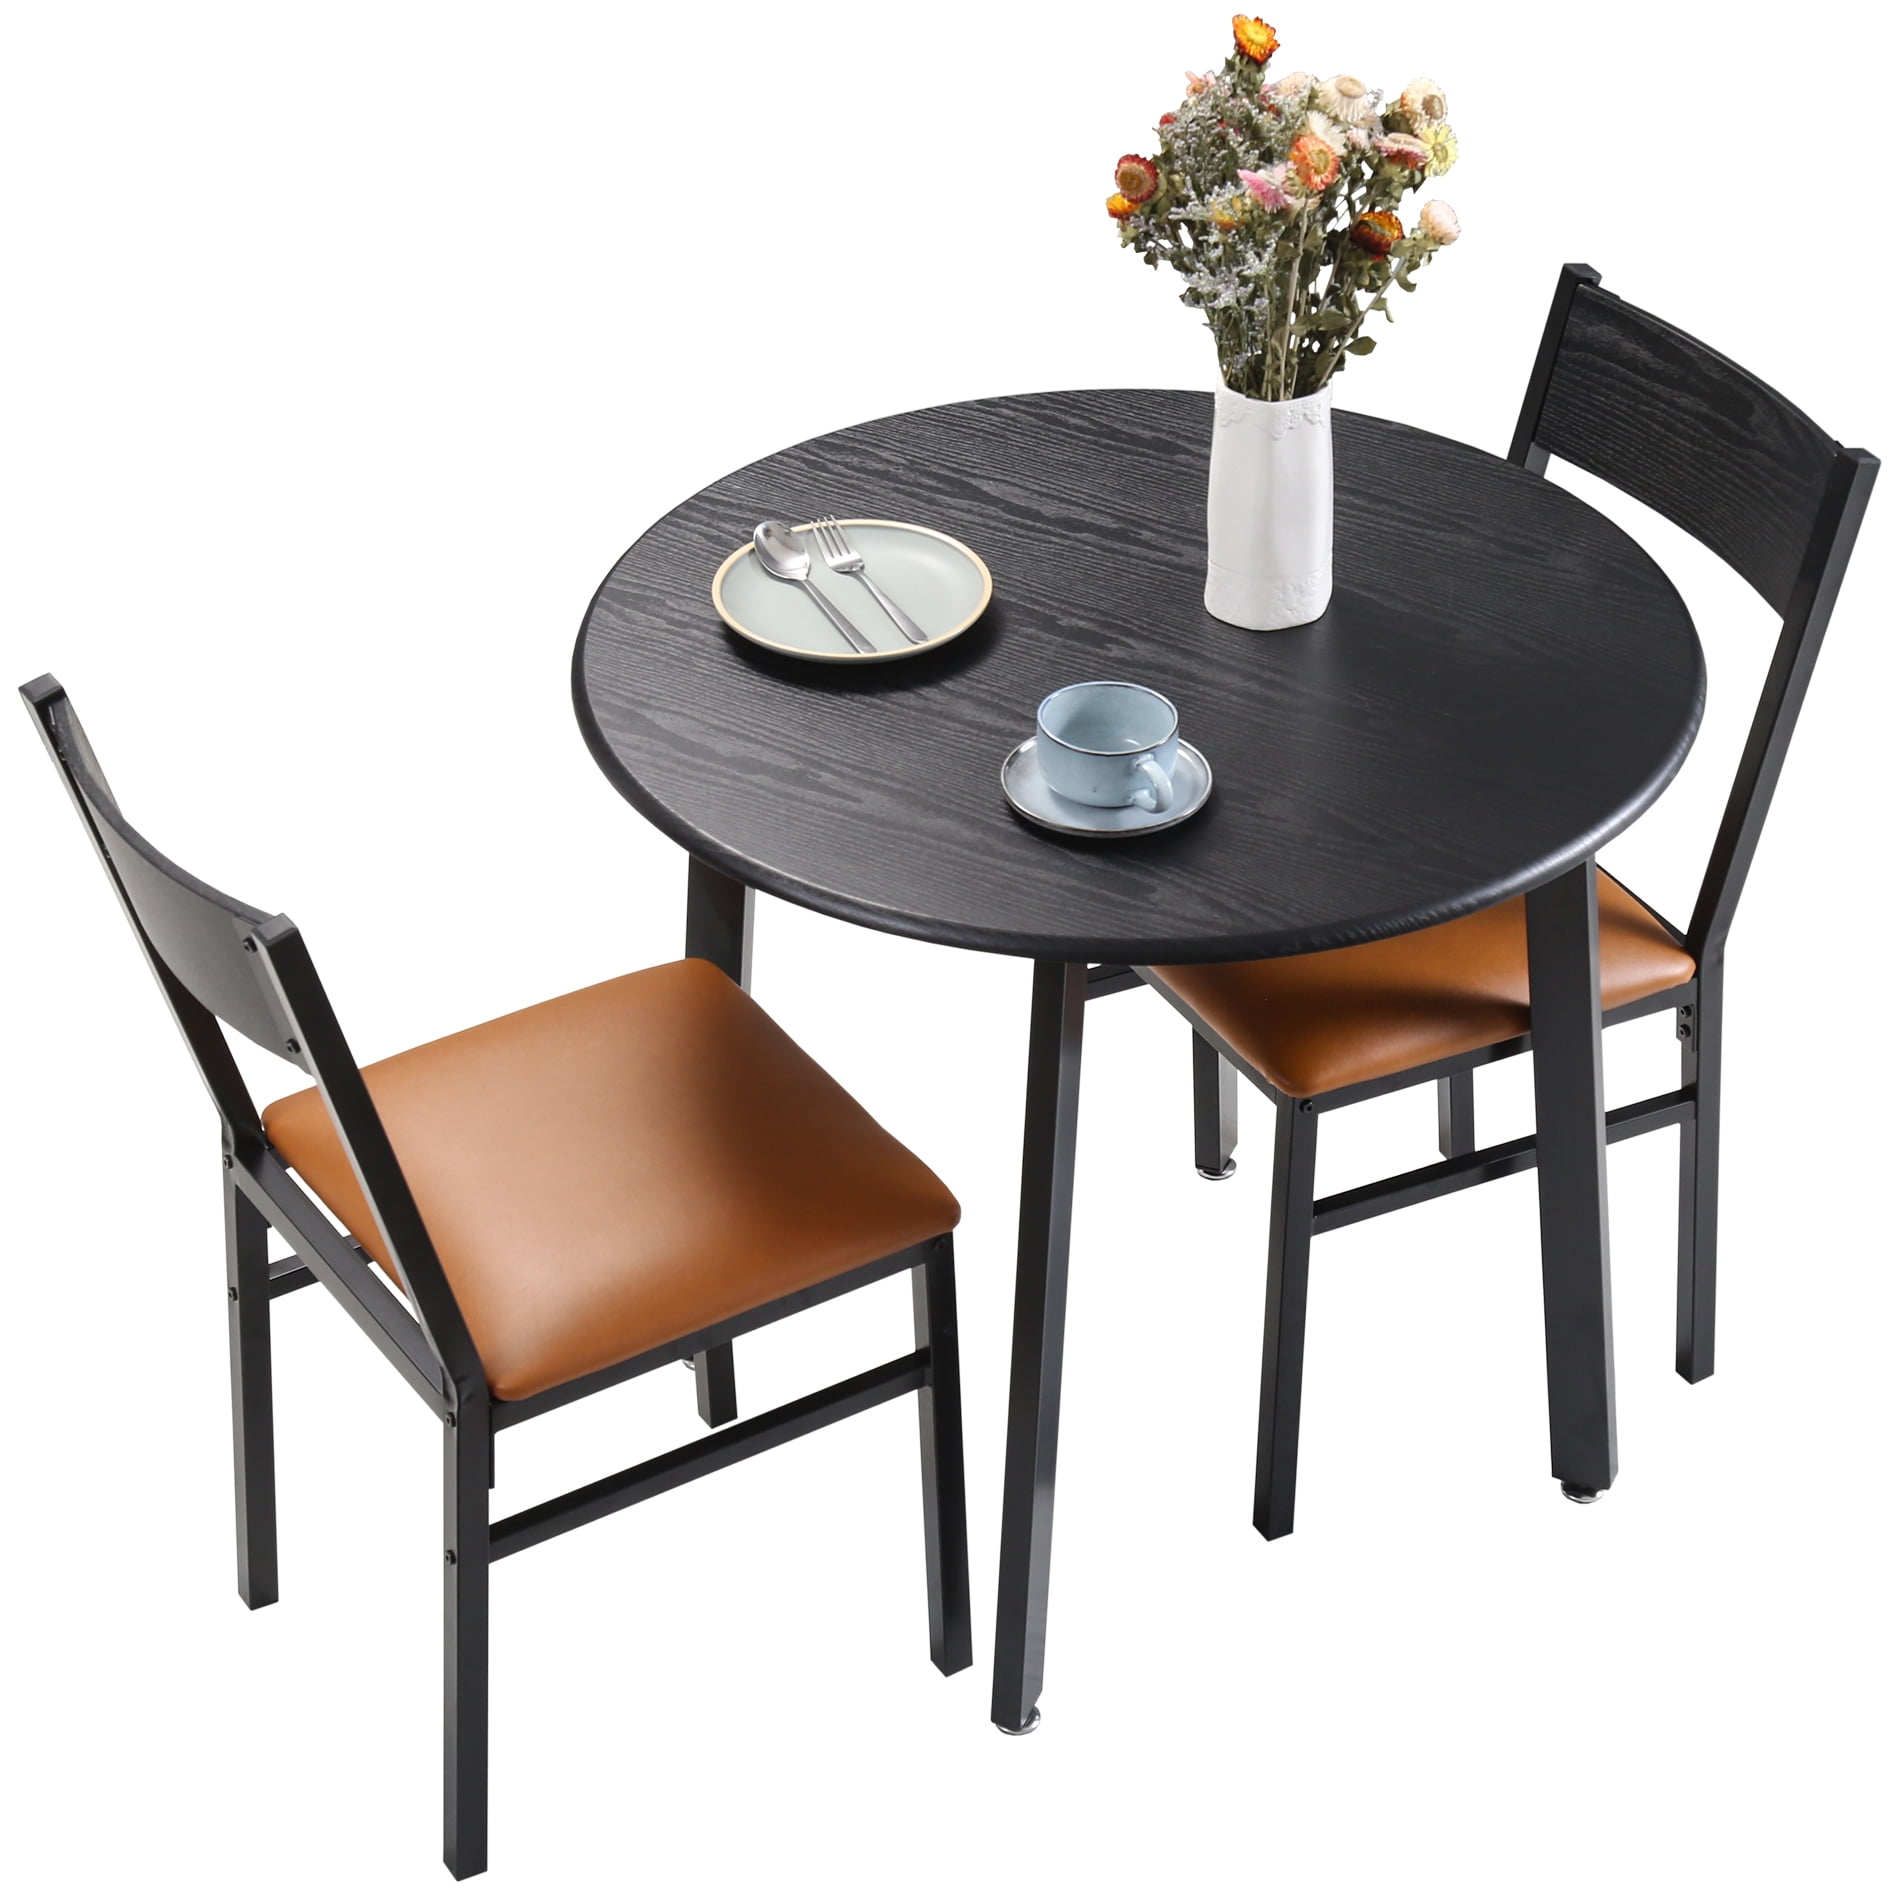 3 Piece Round Dining Table Set With, Small Round Dining Table And Chairs Set